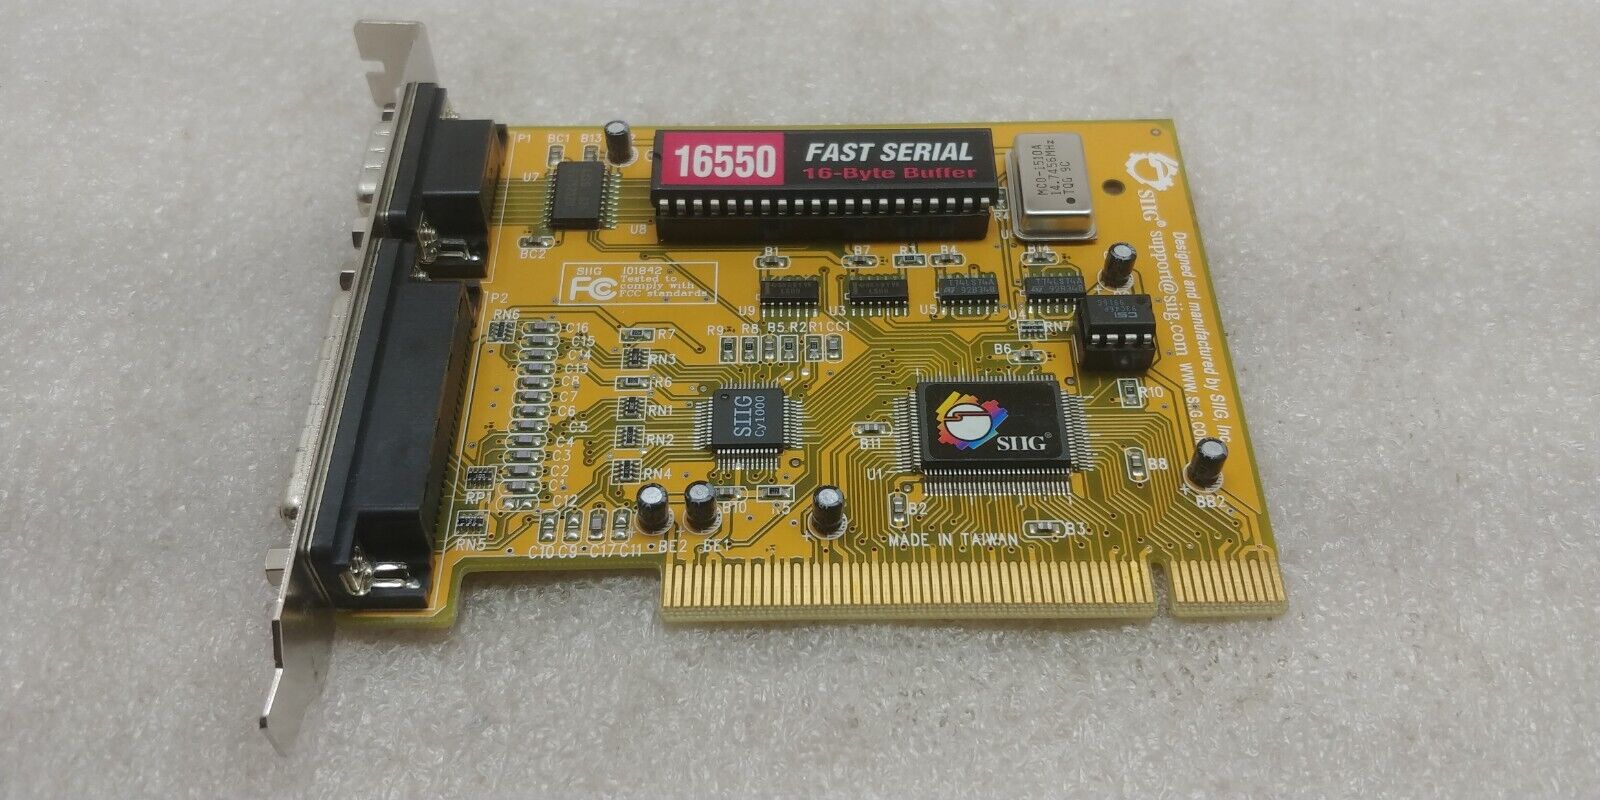 Vintage SIIG IO1842 Cyber I/O PCI Serial Parallel Combo Adapter Card JJ-P11012